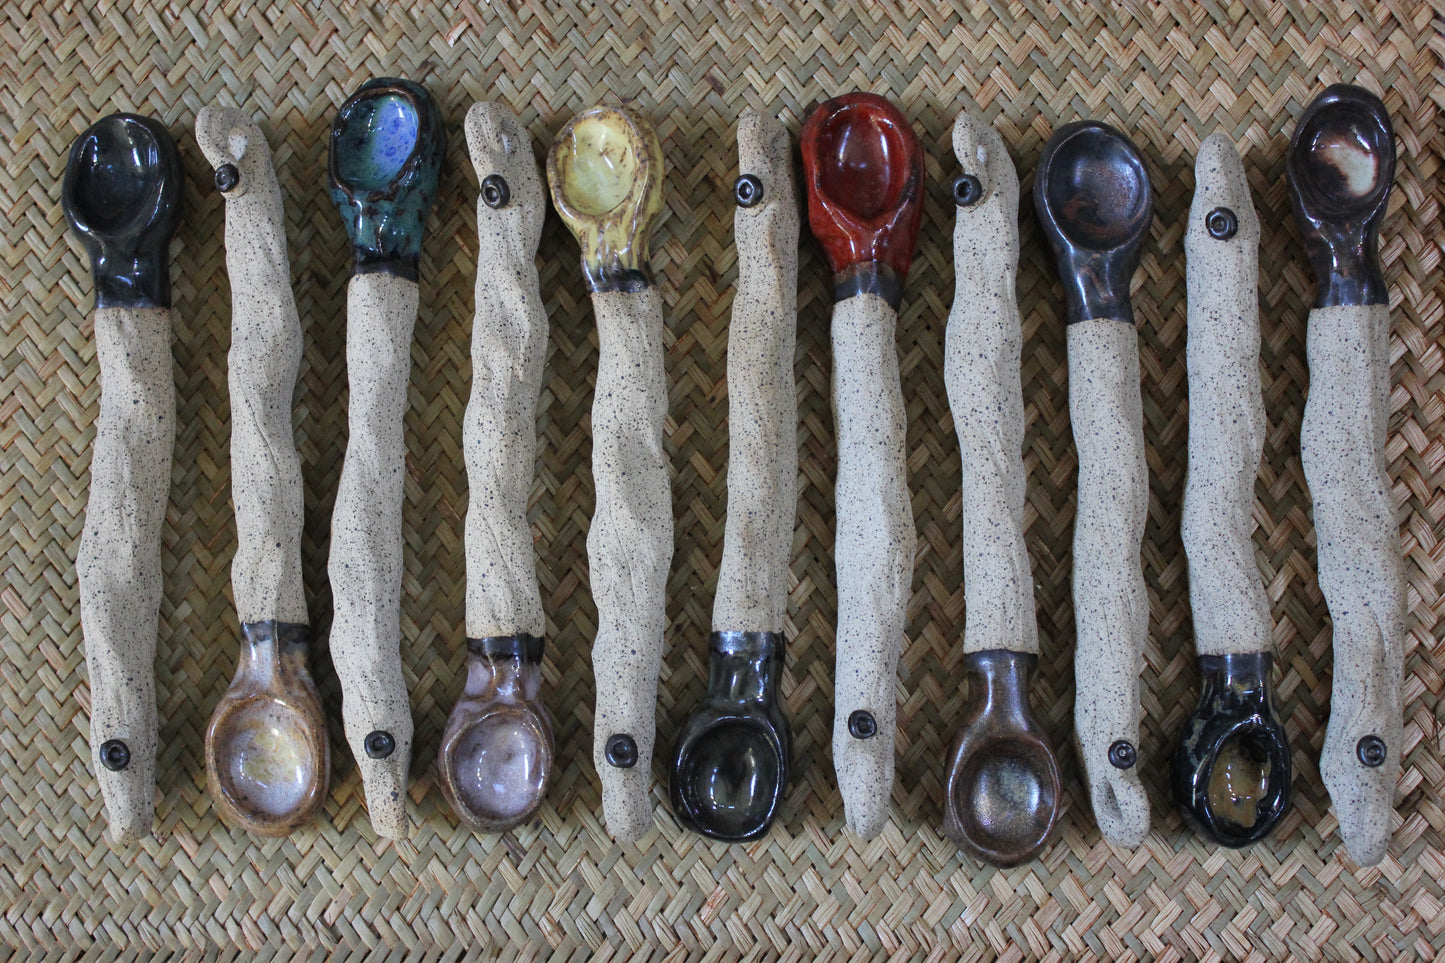 Earthy Ceramic Carmel-Gold Serving Spoon as a Unique Ornament or for Food Consumption